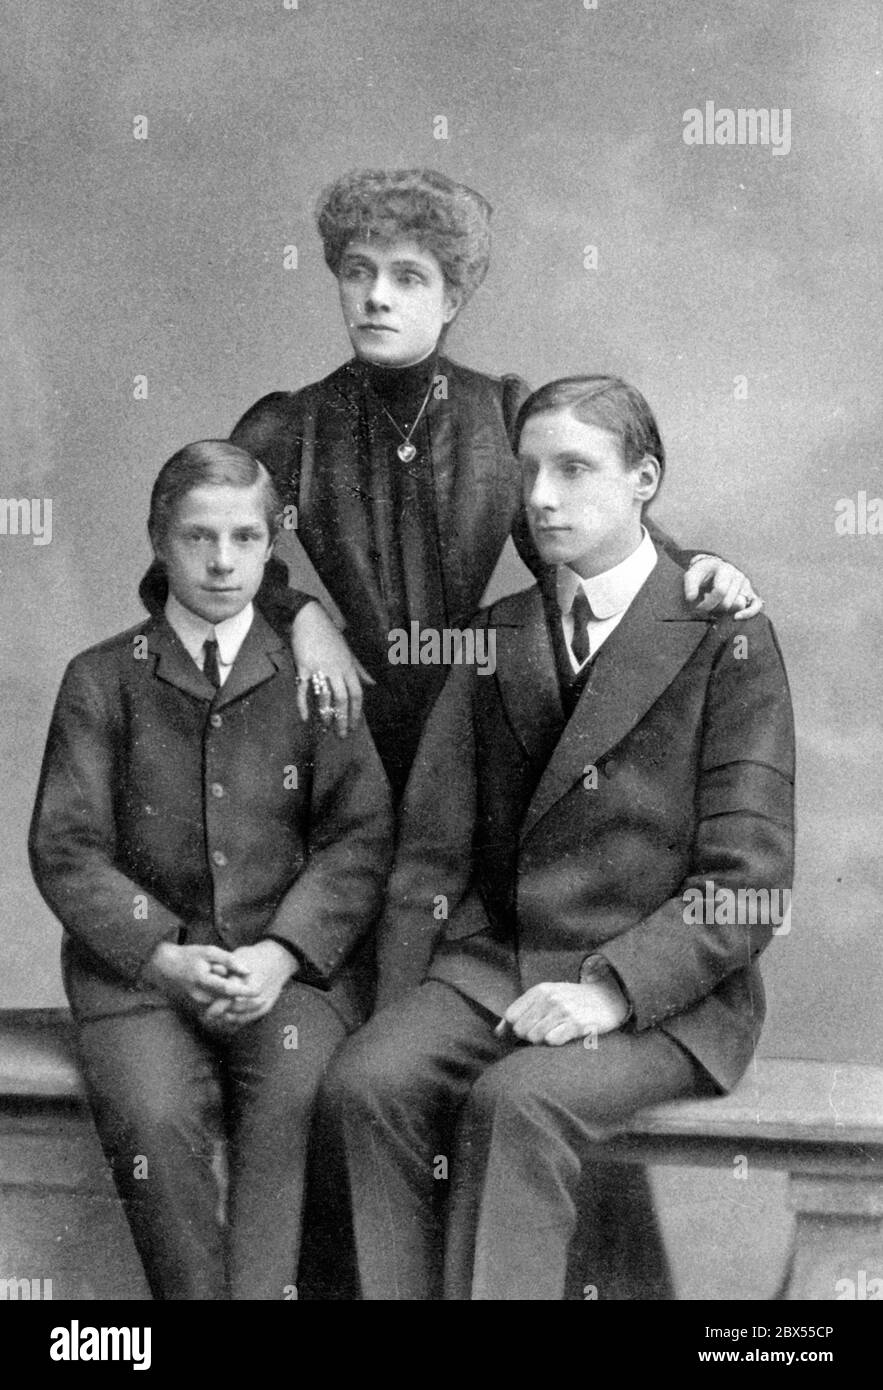 Two sons from upper class families with their mother. The boys wear the typical youth clothing of the upper classes, a suit with a stiff collar and tie. Stock Photo